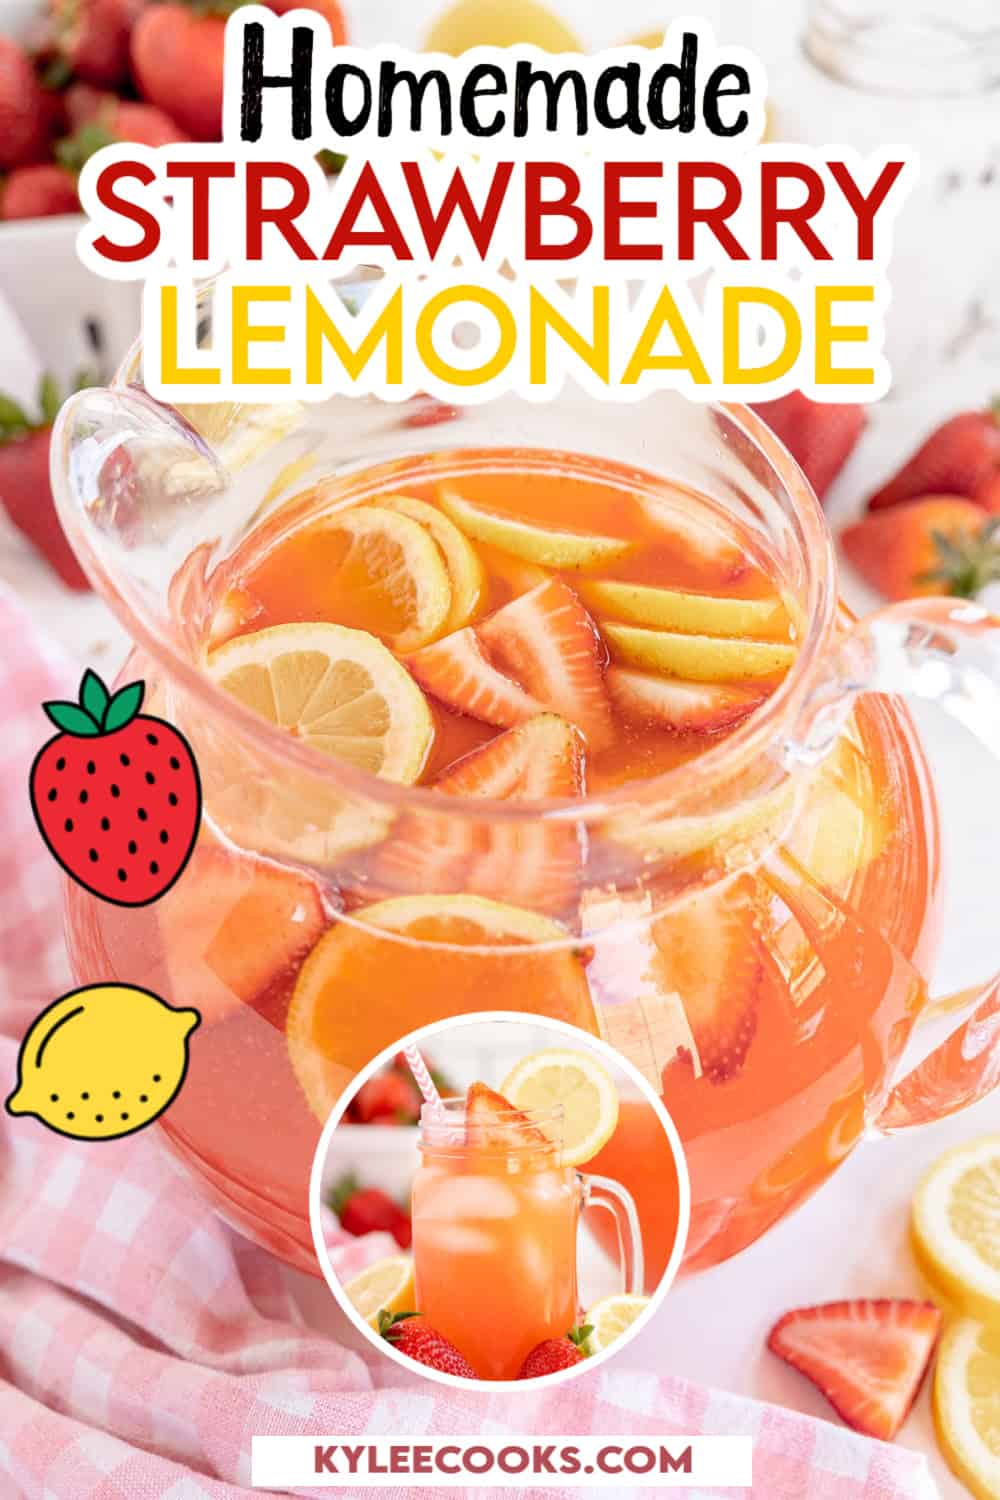 strawberry lemonade in a glass pitcher.